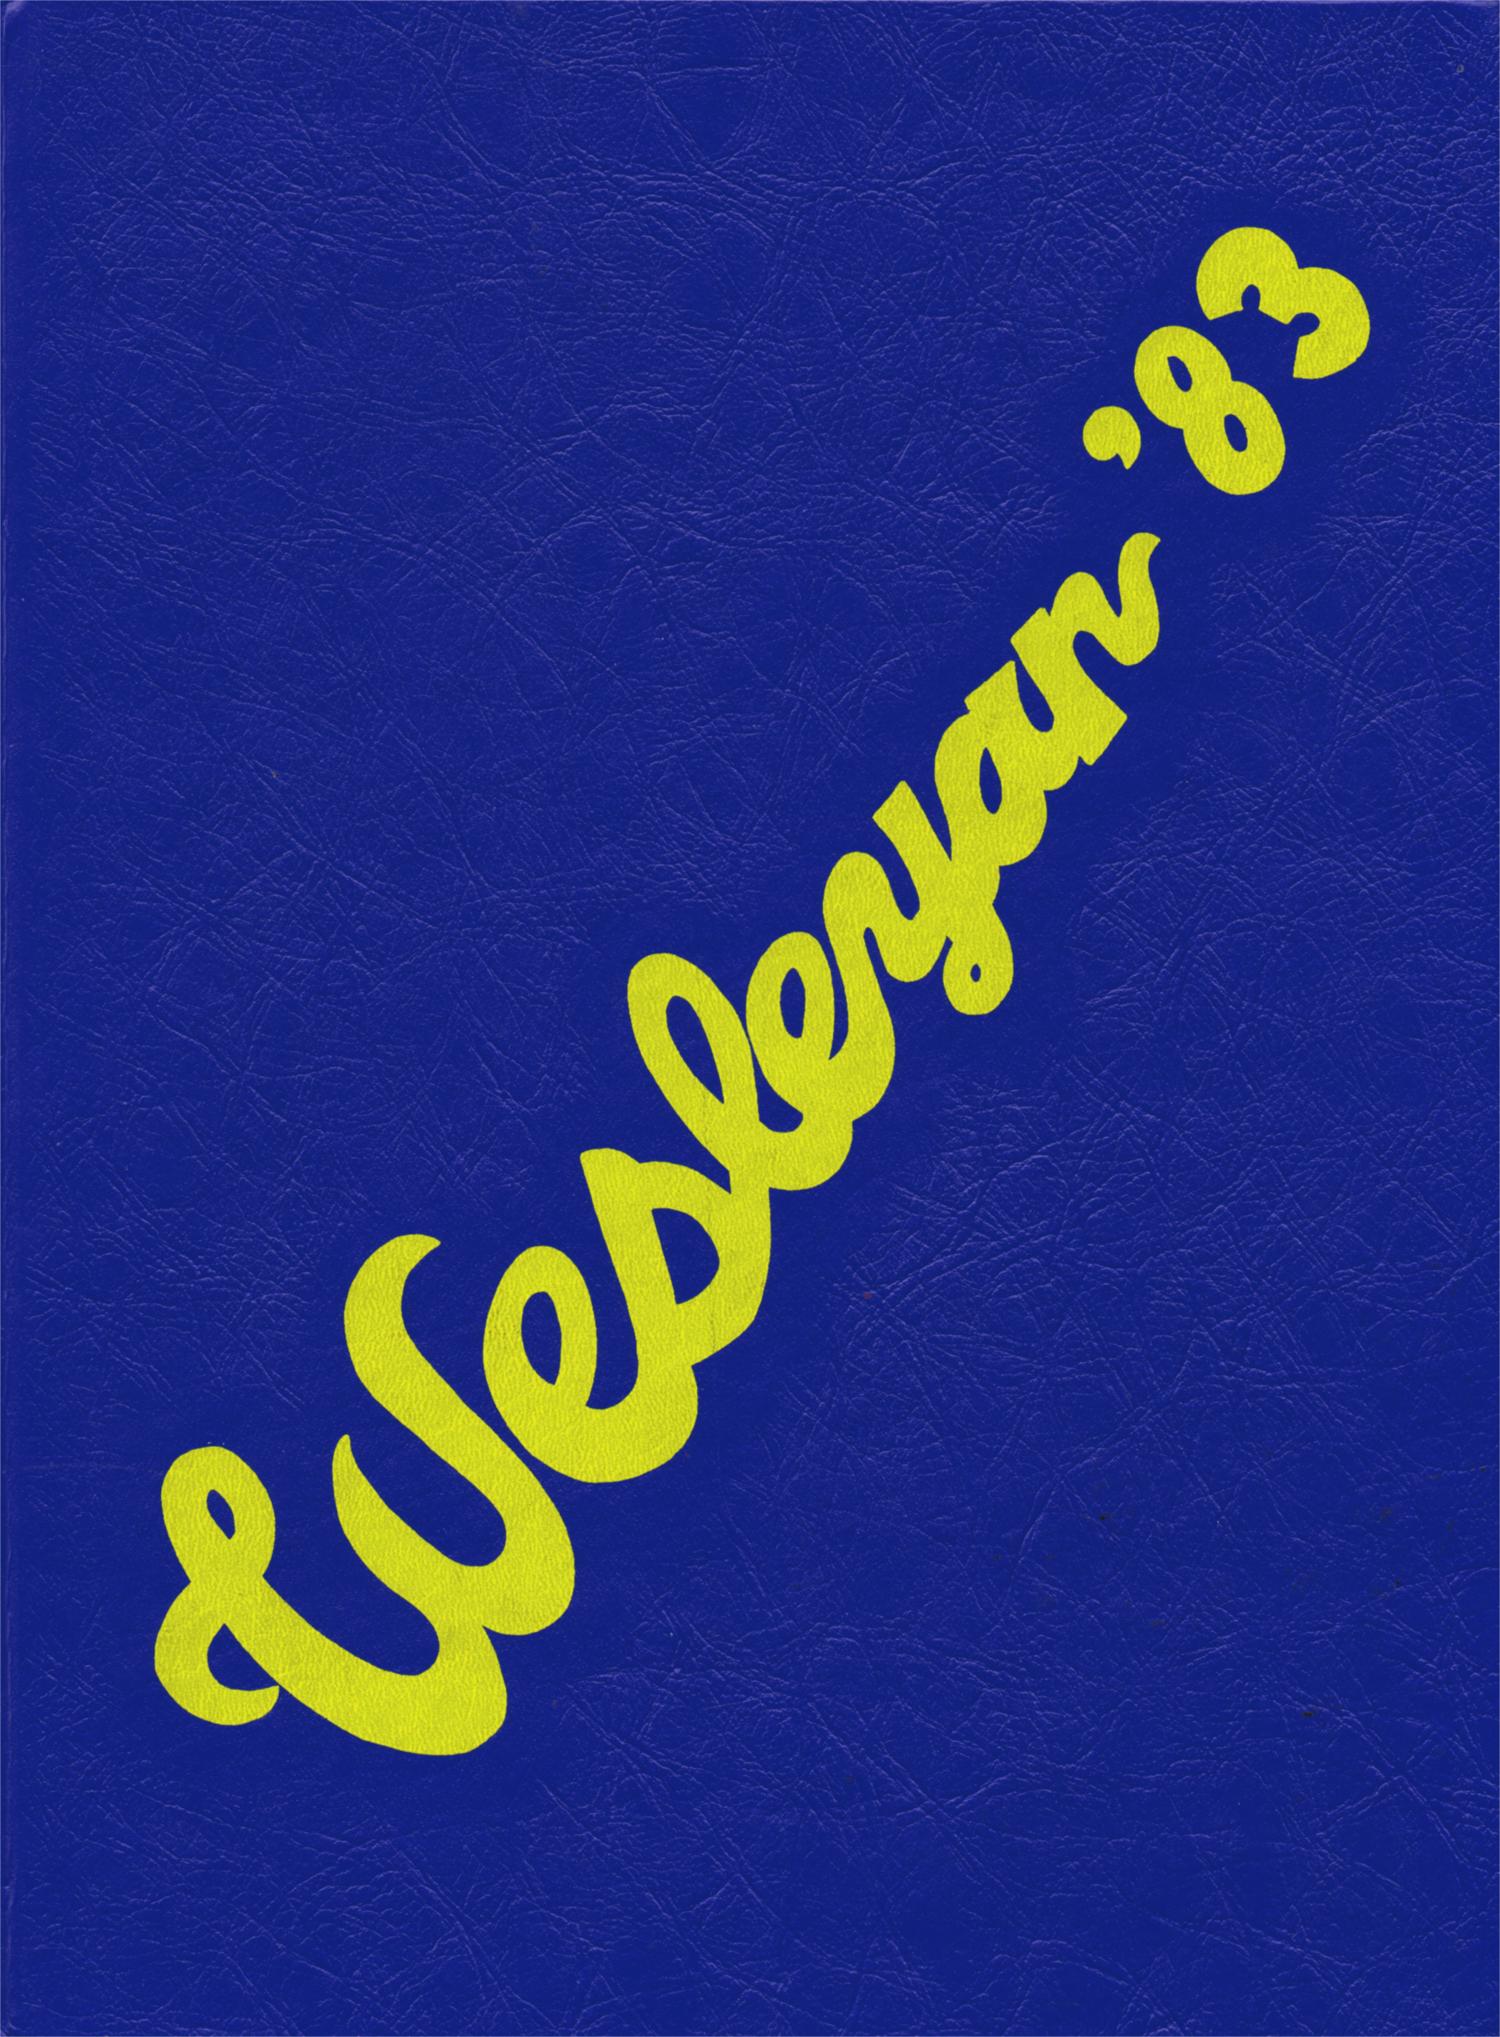 TXWECO, Yearbook of Texas Wesleyan College, 1983
                                                
                                                    Front Cover
                                                